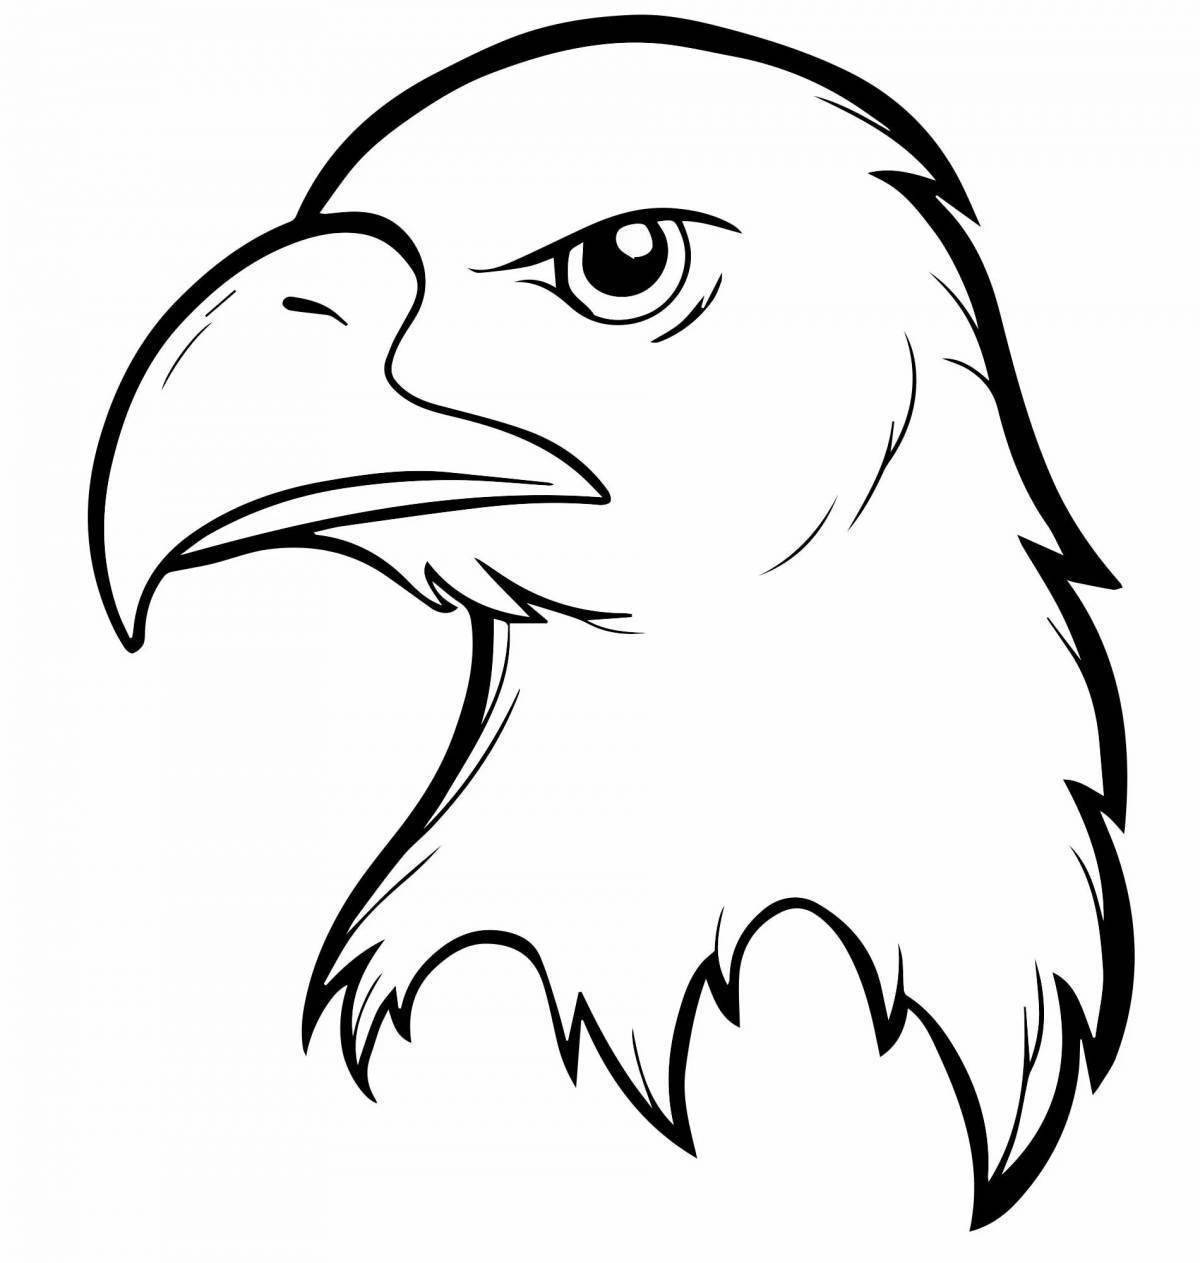 High eagle coloring page for kids